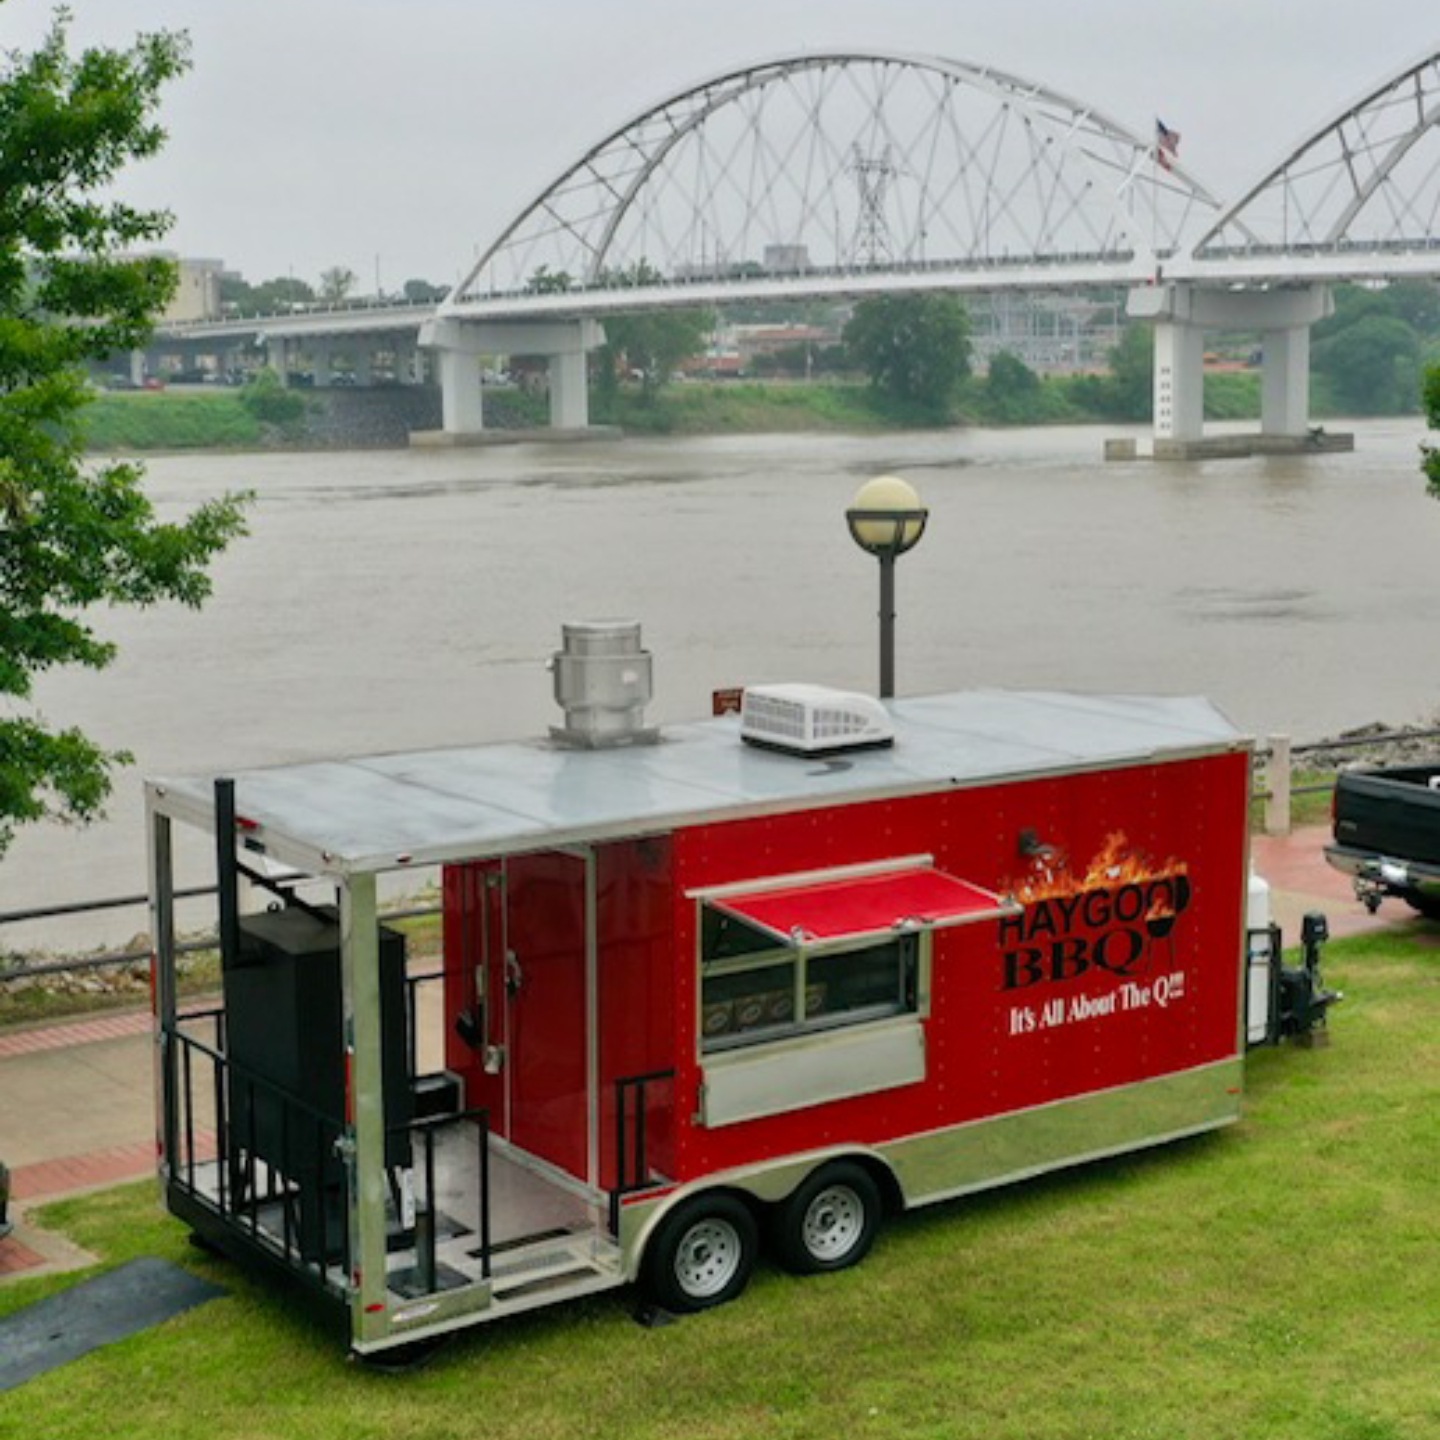 Haygood bbq concession & catering  food truck profile image